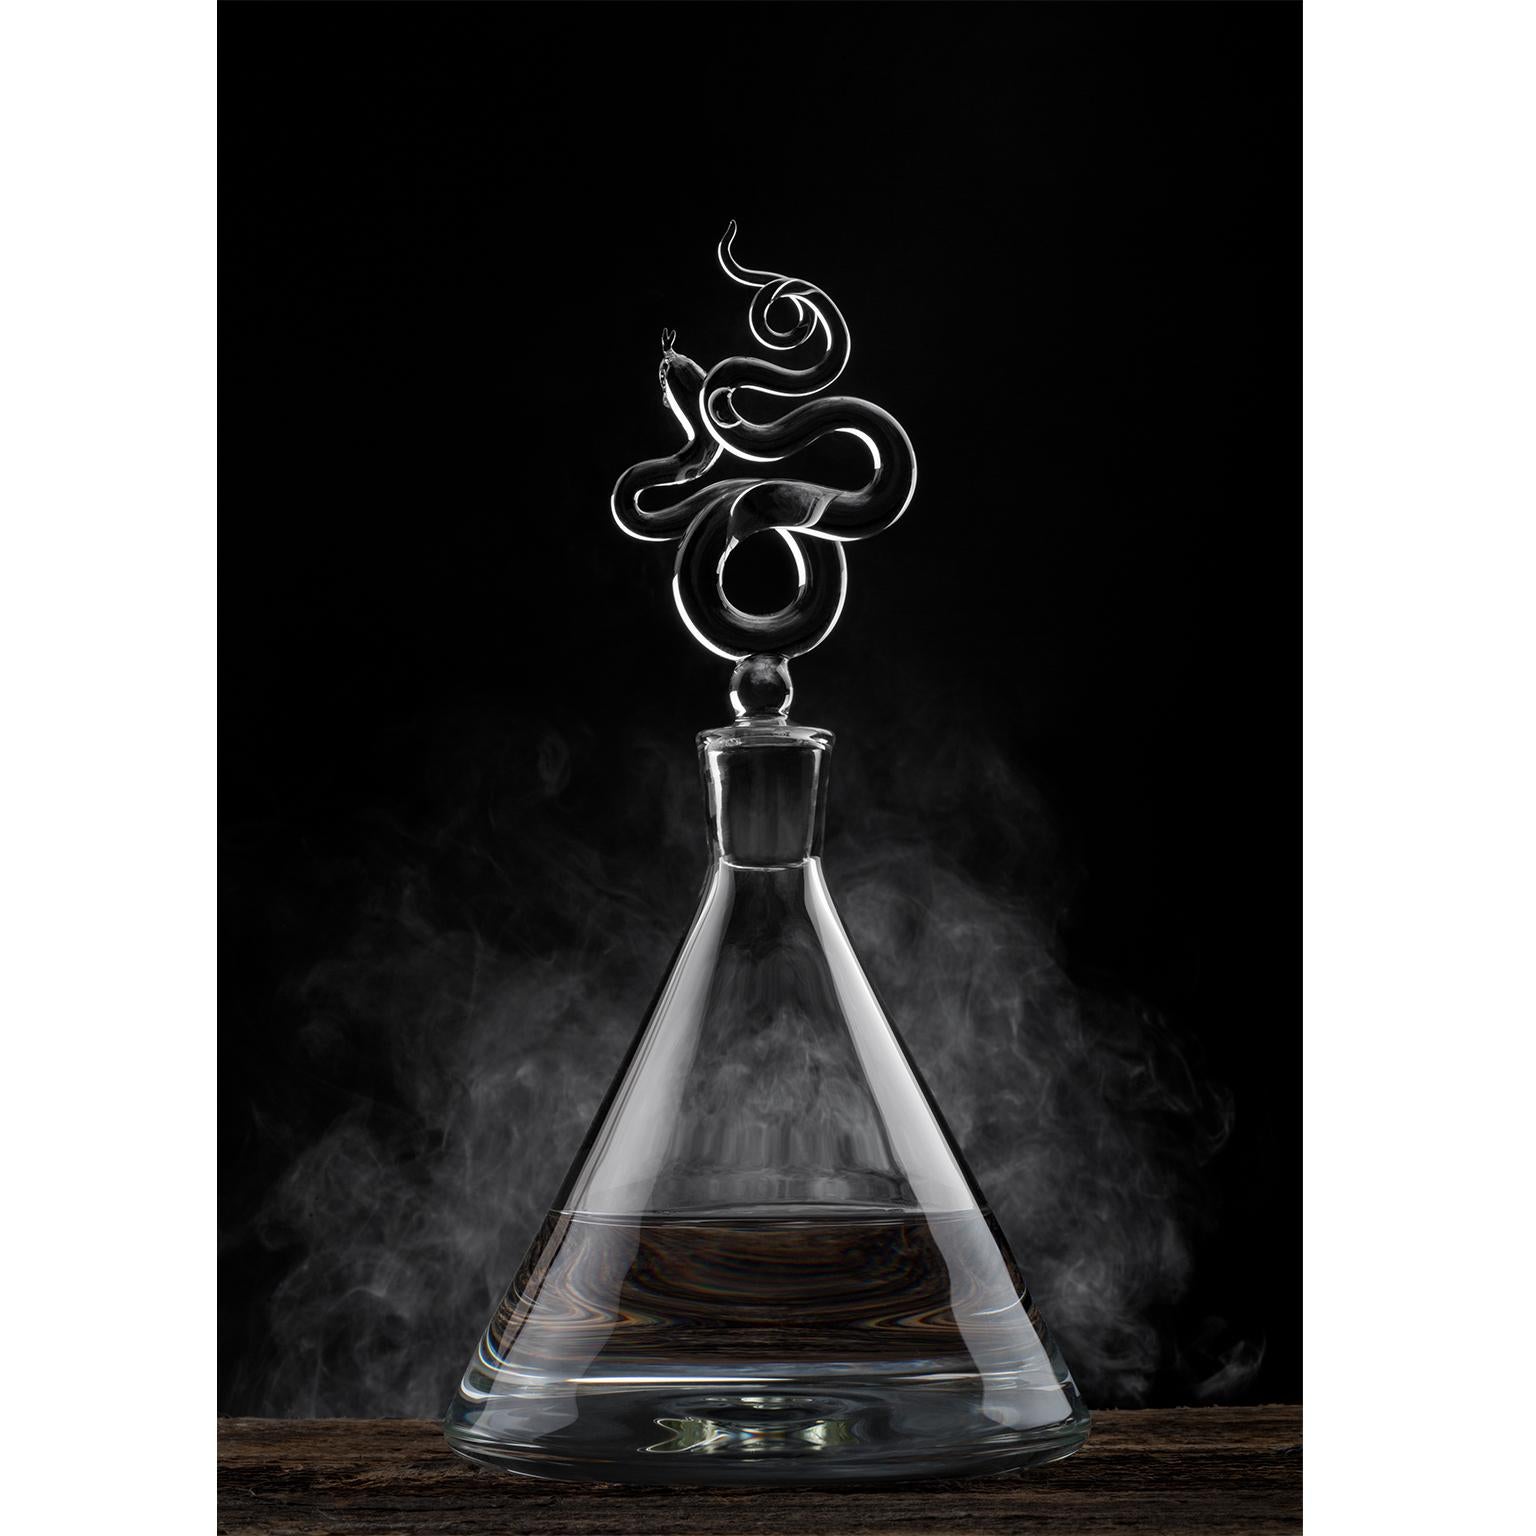 'Serpentine Decanter'
A Hand Blown Glass Decanter by Simone Crestani

Serpentine Decanter is one of the pieces from the Serpentine Collection.

